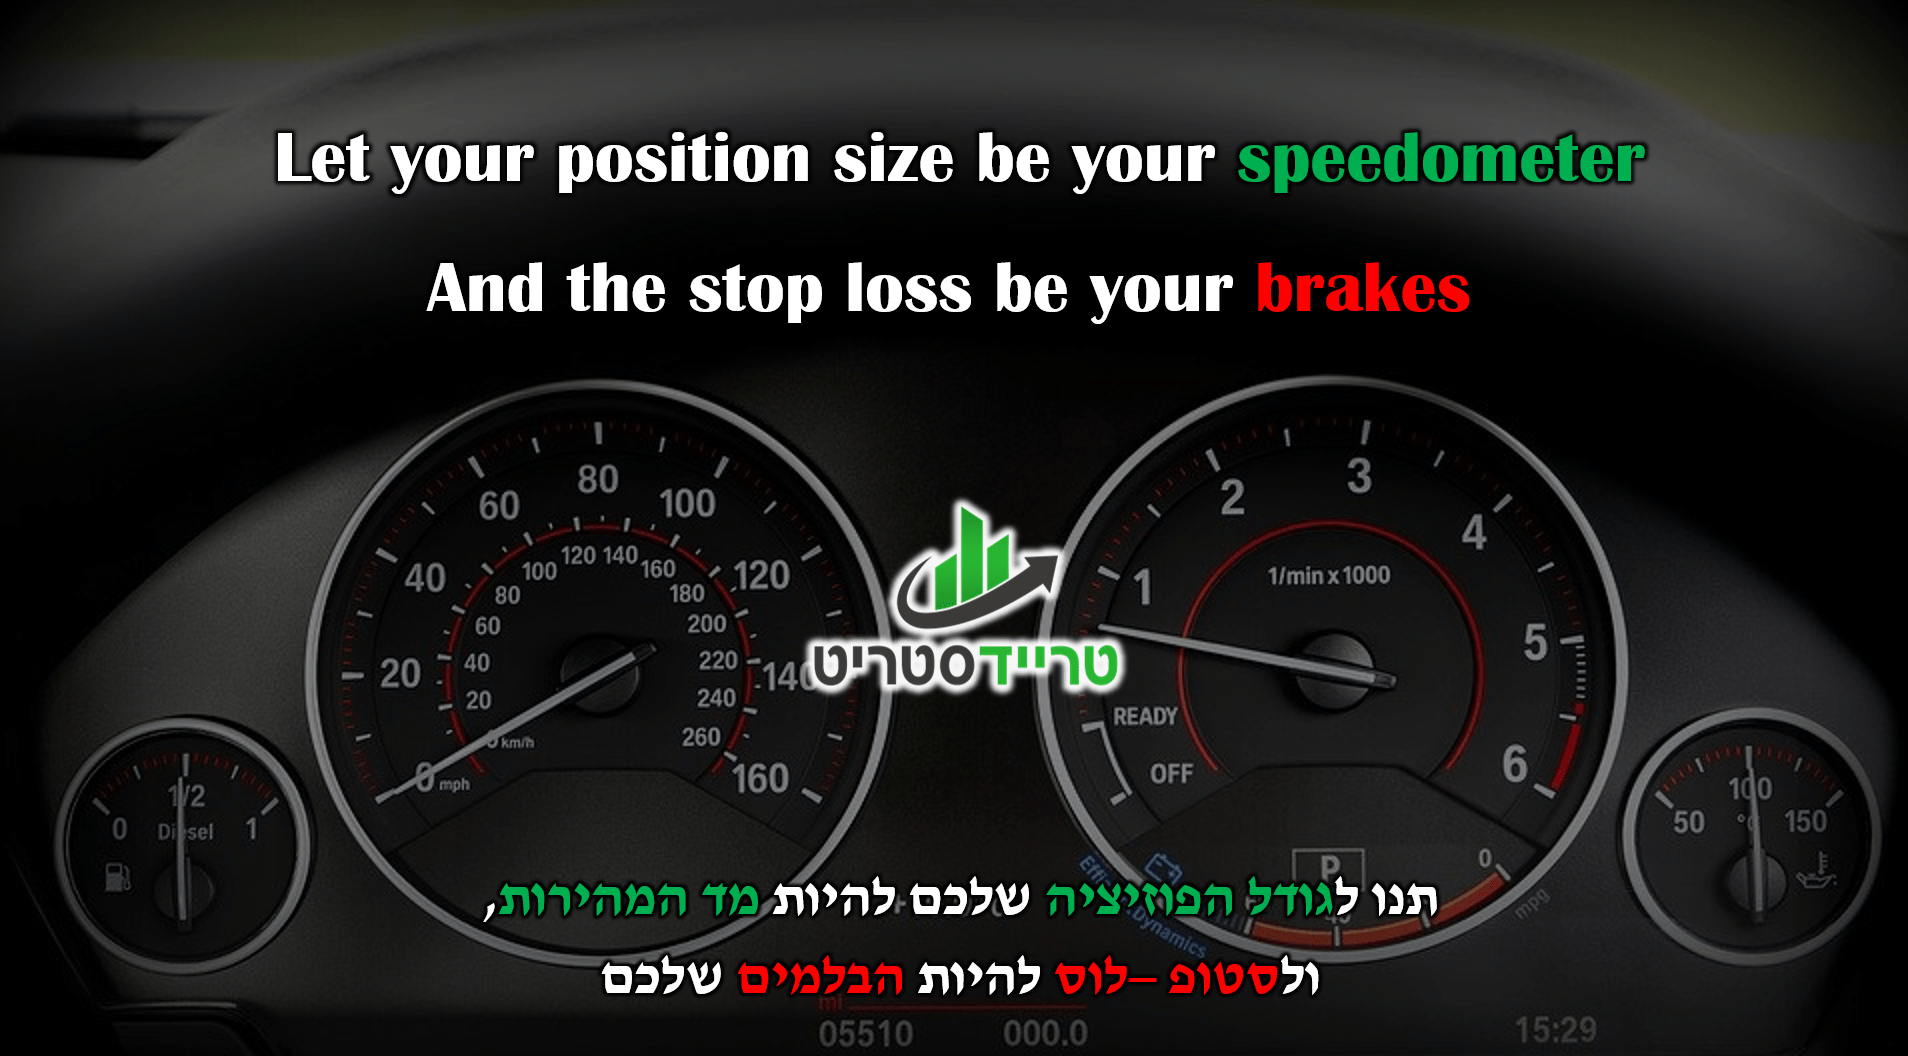 Let your position size be your speedometer